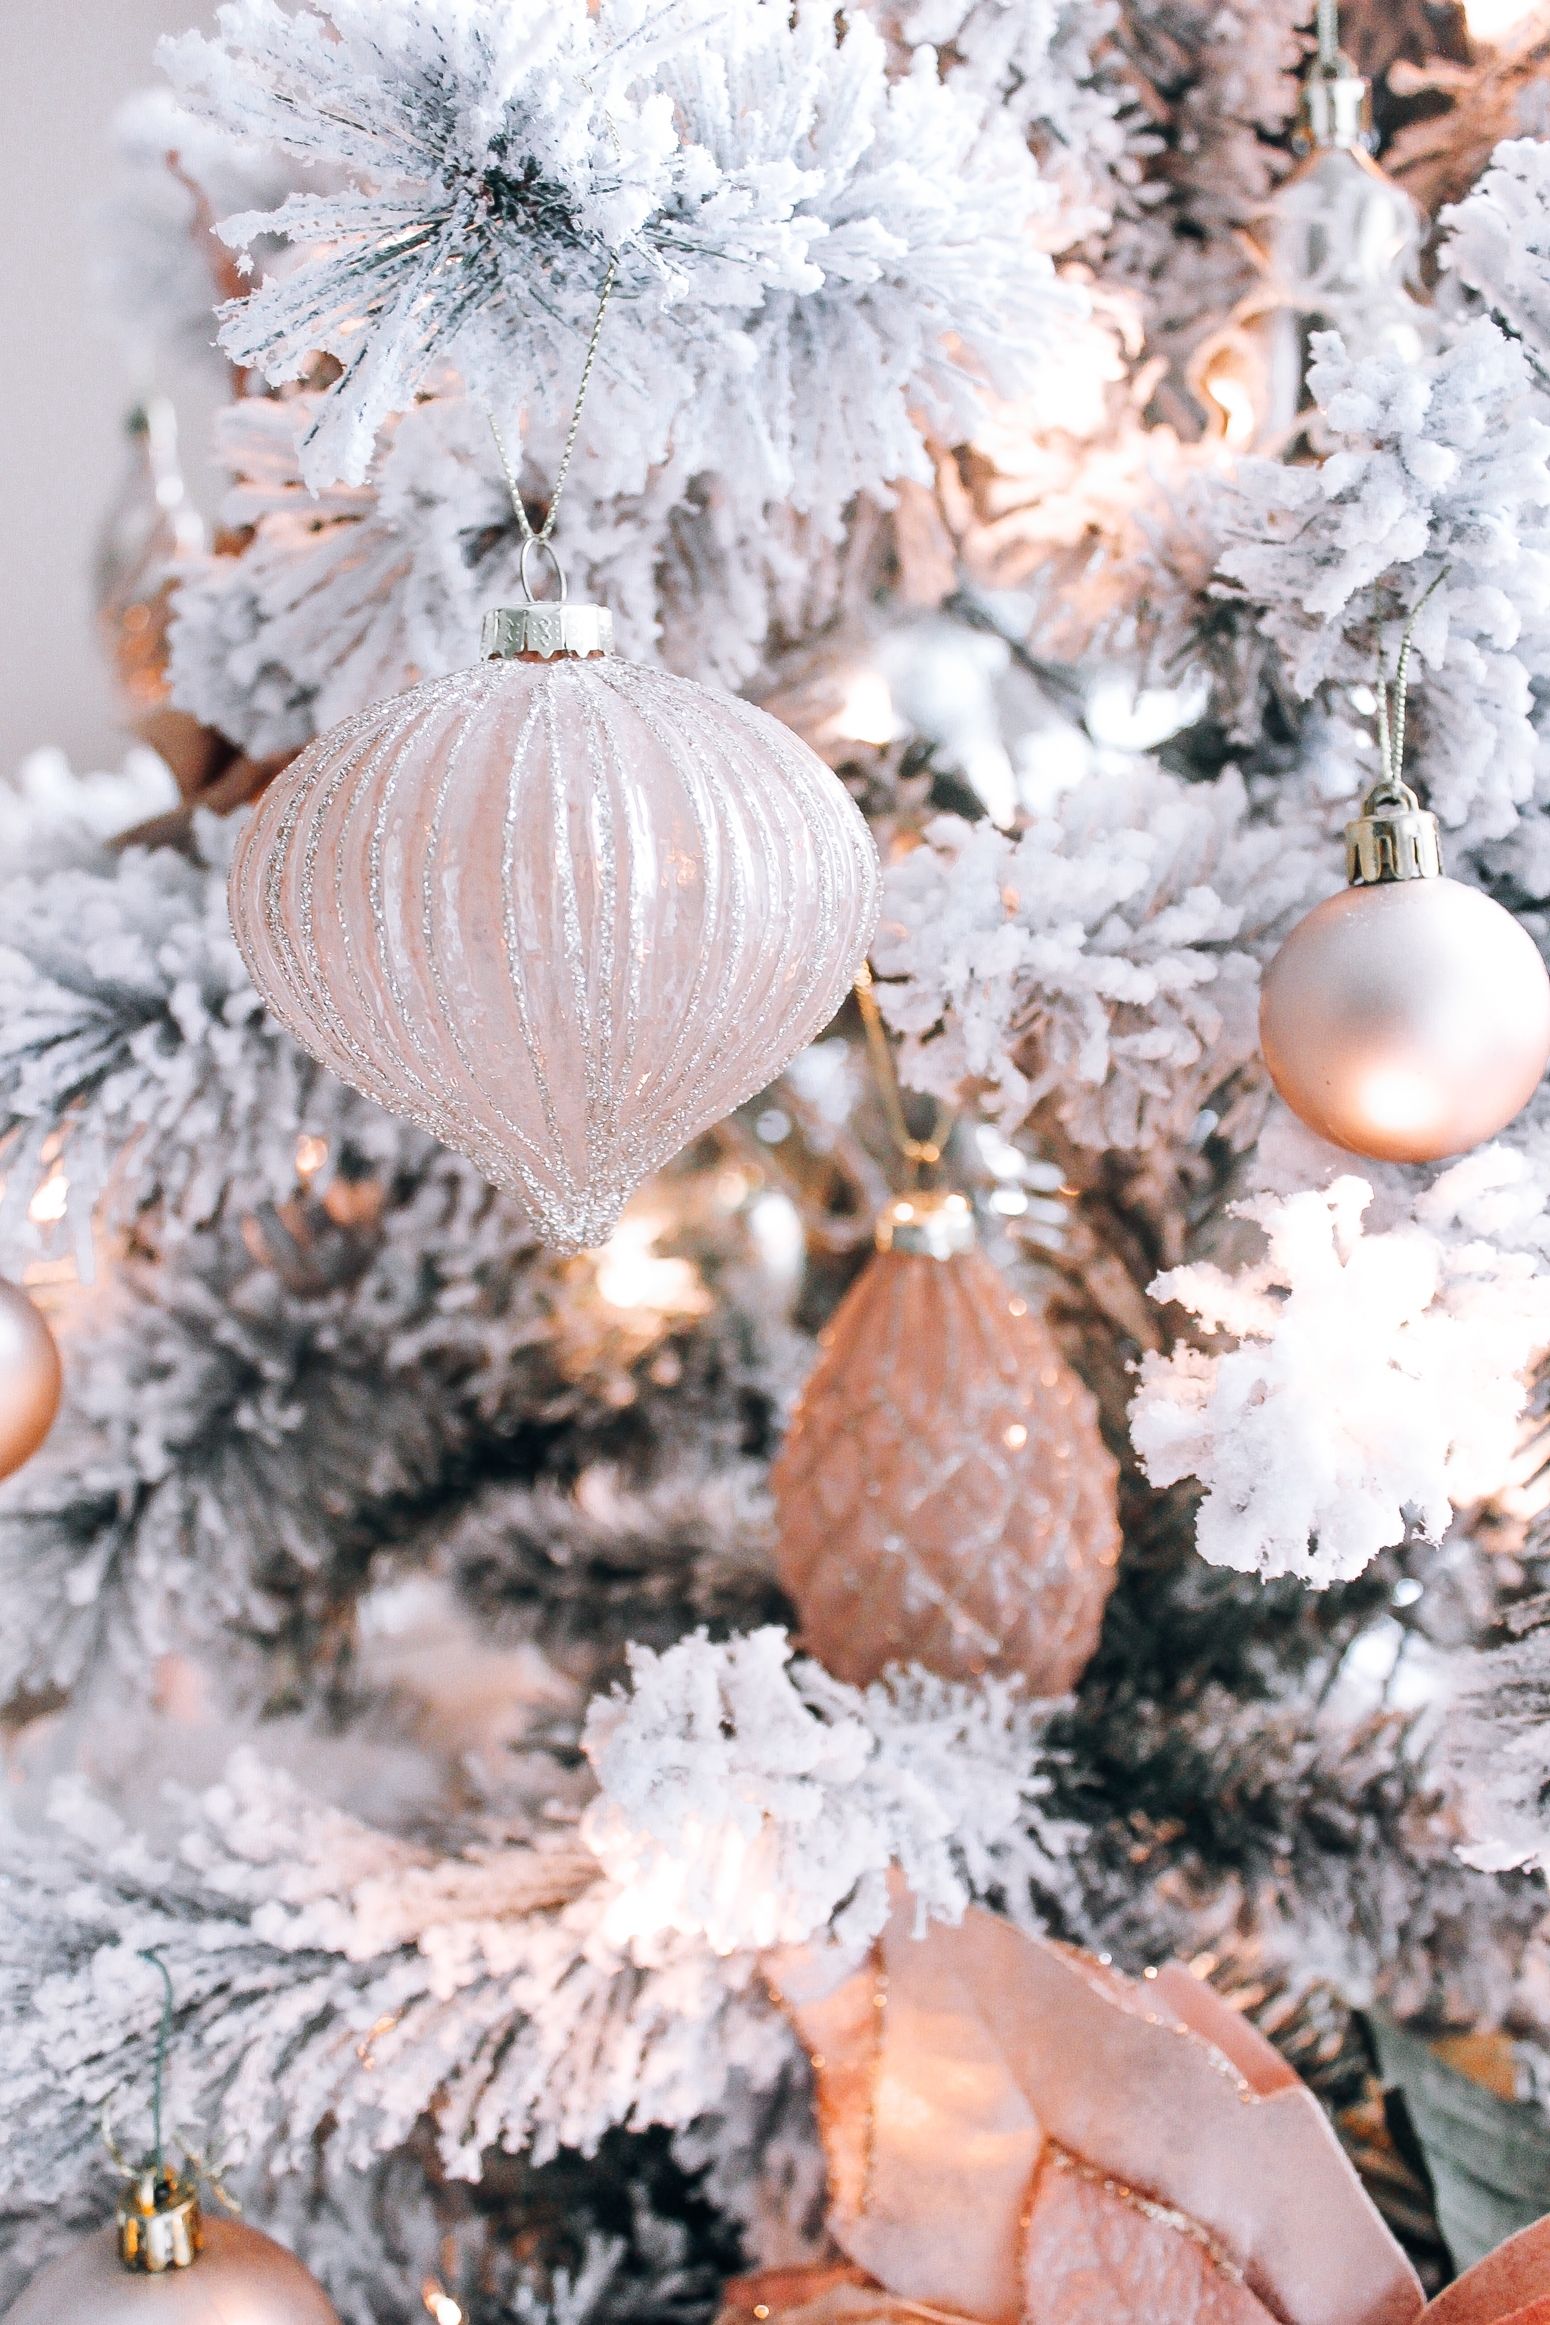 Rose Gold Christmas Ornaments You'll Love in 2020